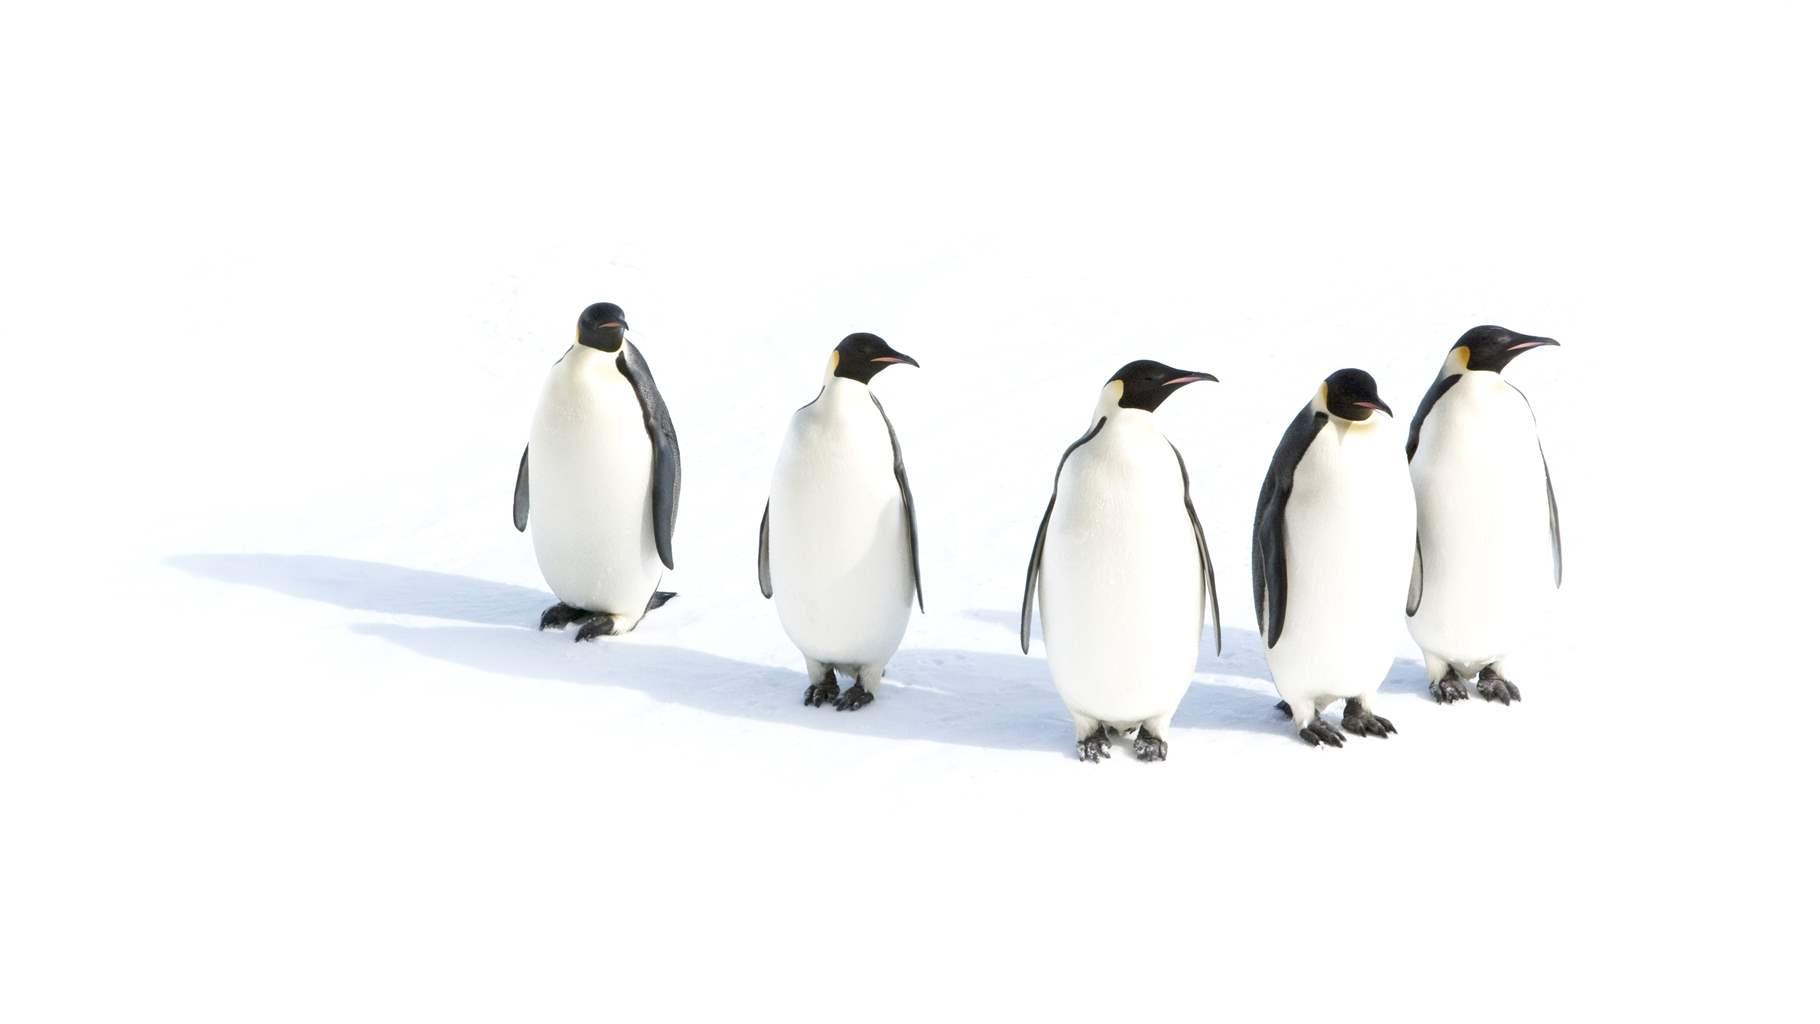 Iconic emperor penguins are one species that benefits from marine protections established in Antarctica’s Ross Sea in October 2016.